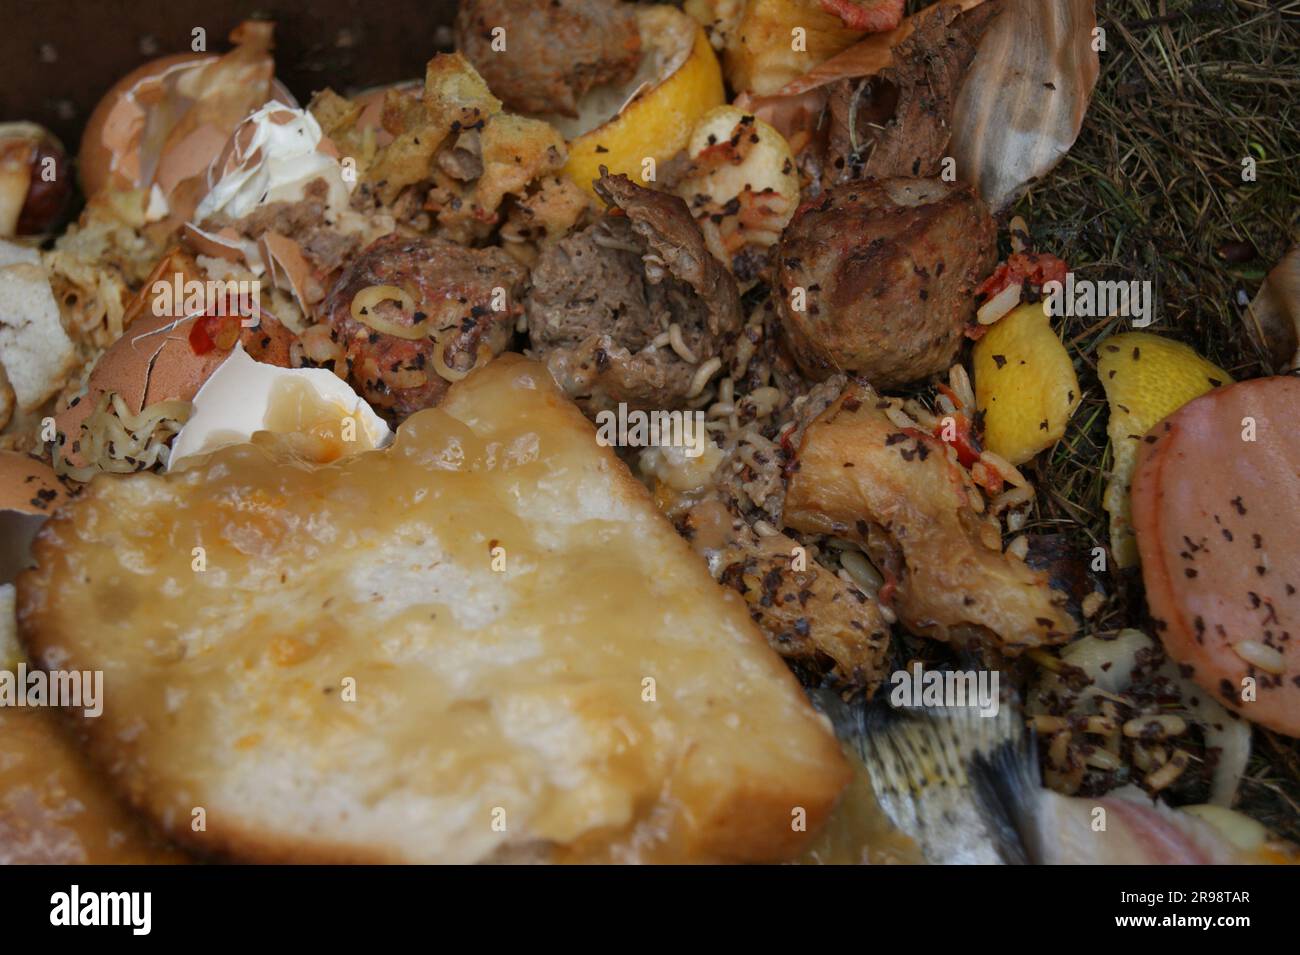 Processing of food waste. Various food waste close-up. Stock Photo